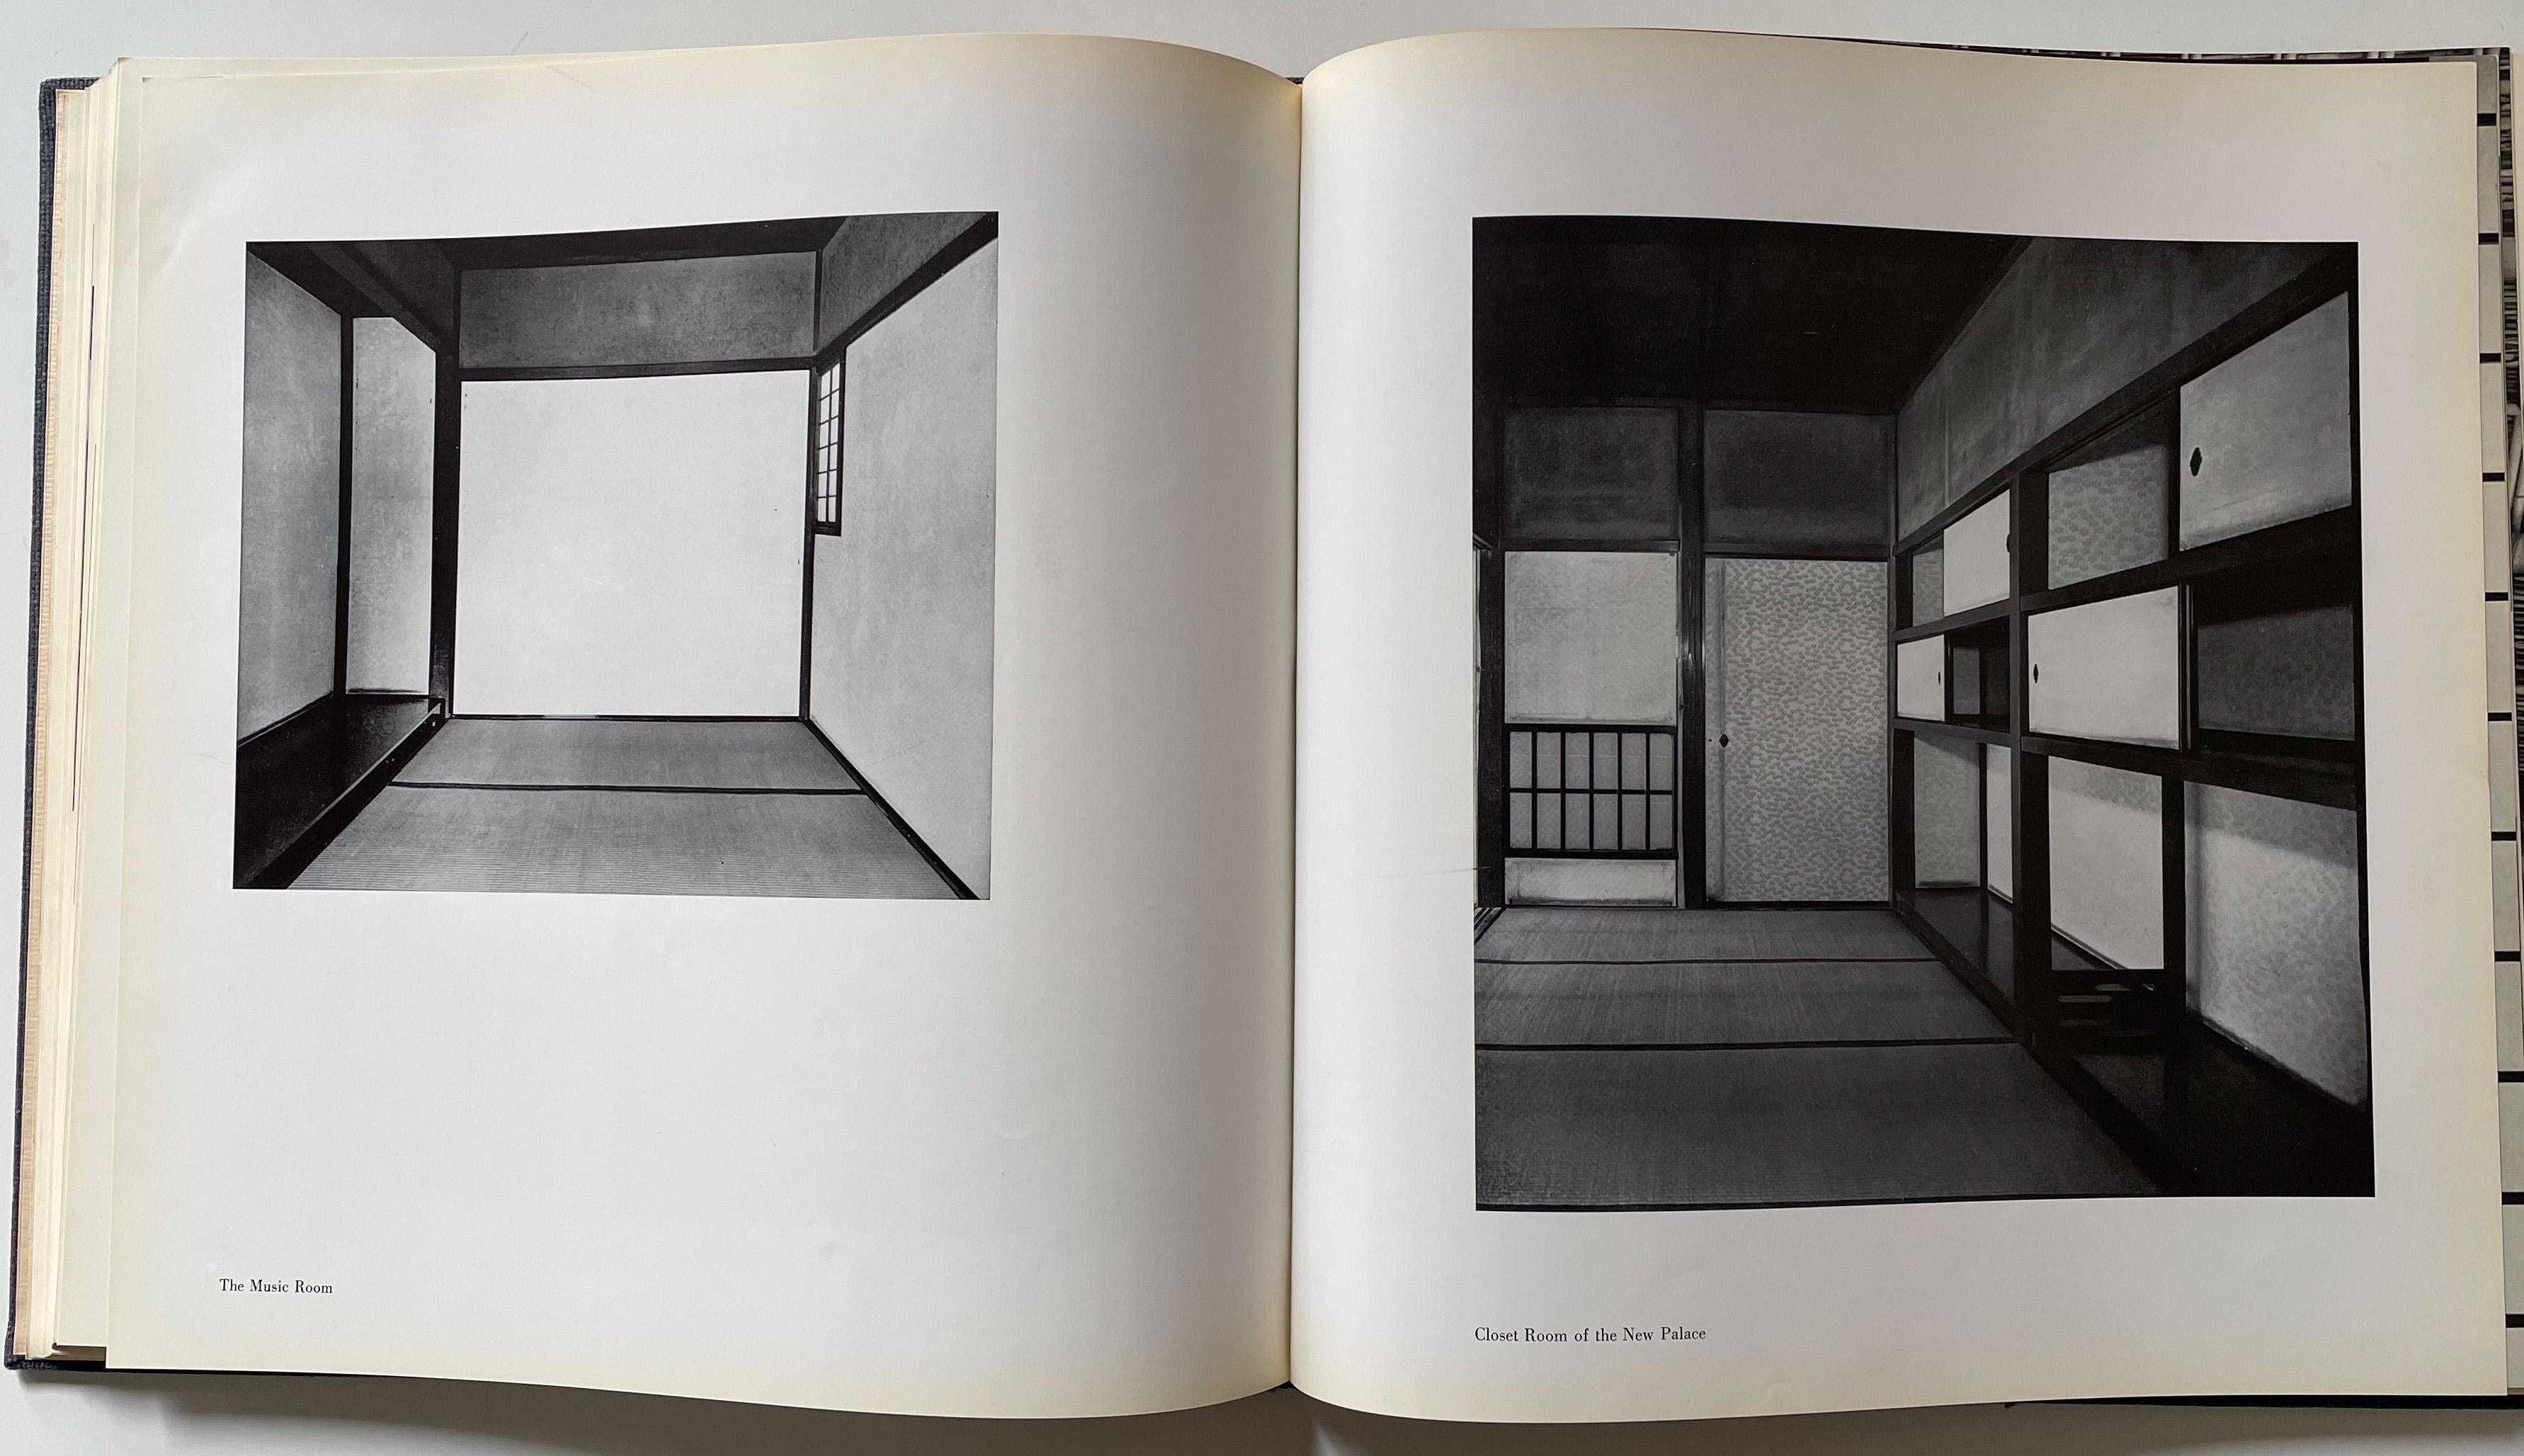 Mid-20th Century Katsura Tradition and Creation in Japanese Architecture